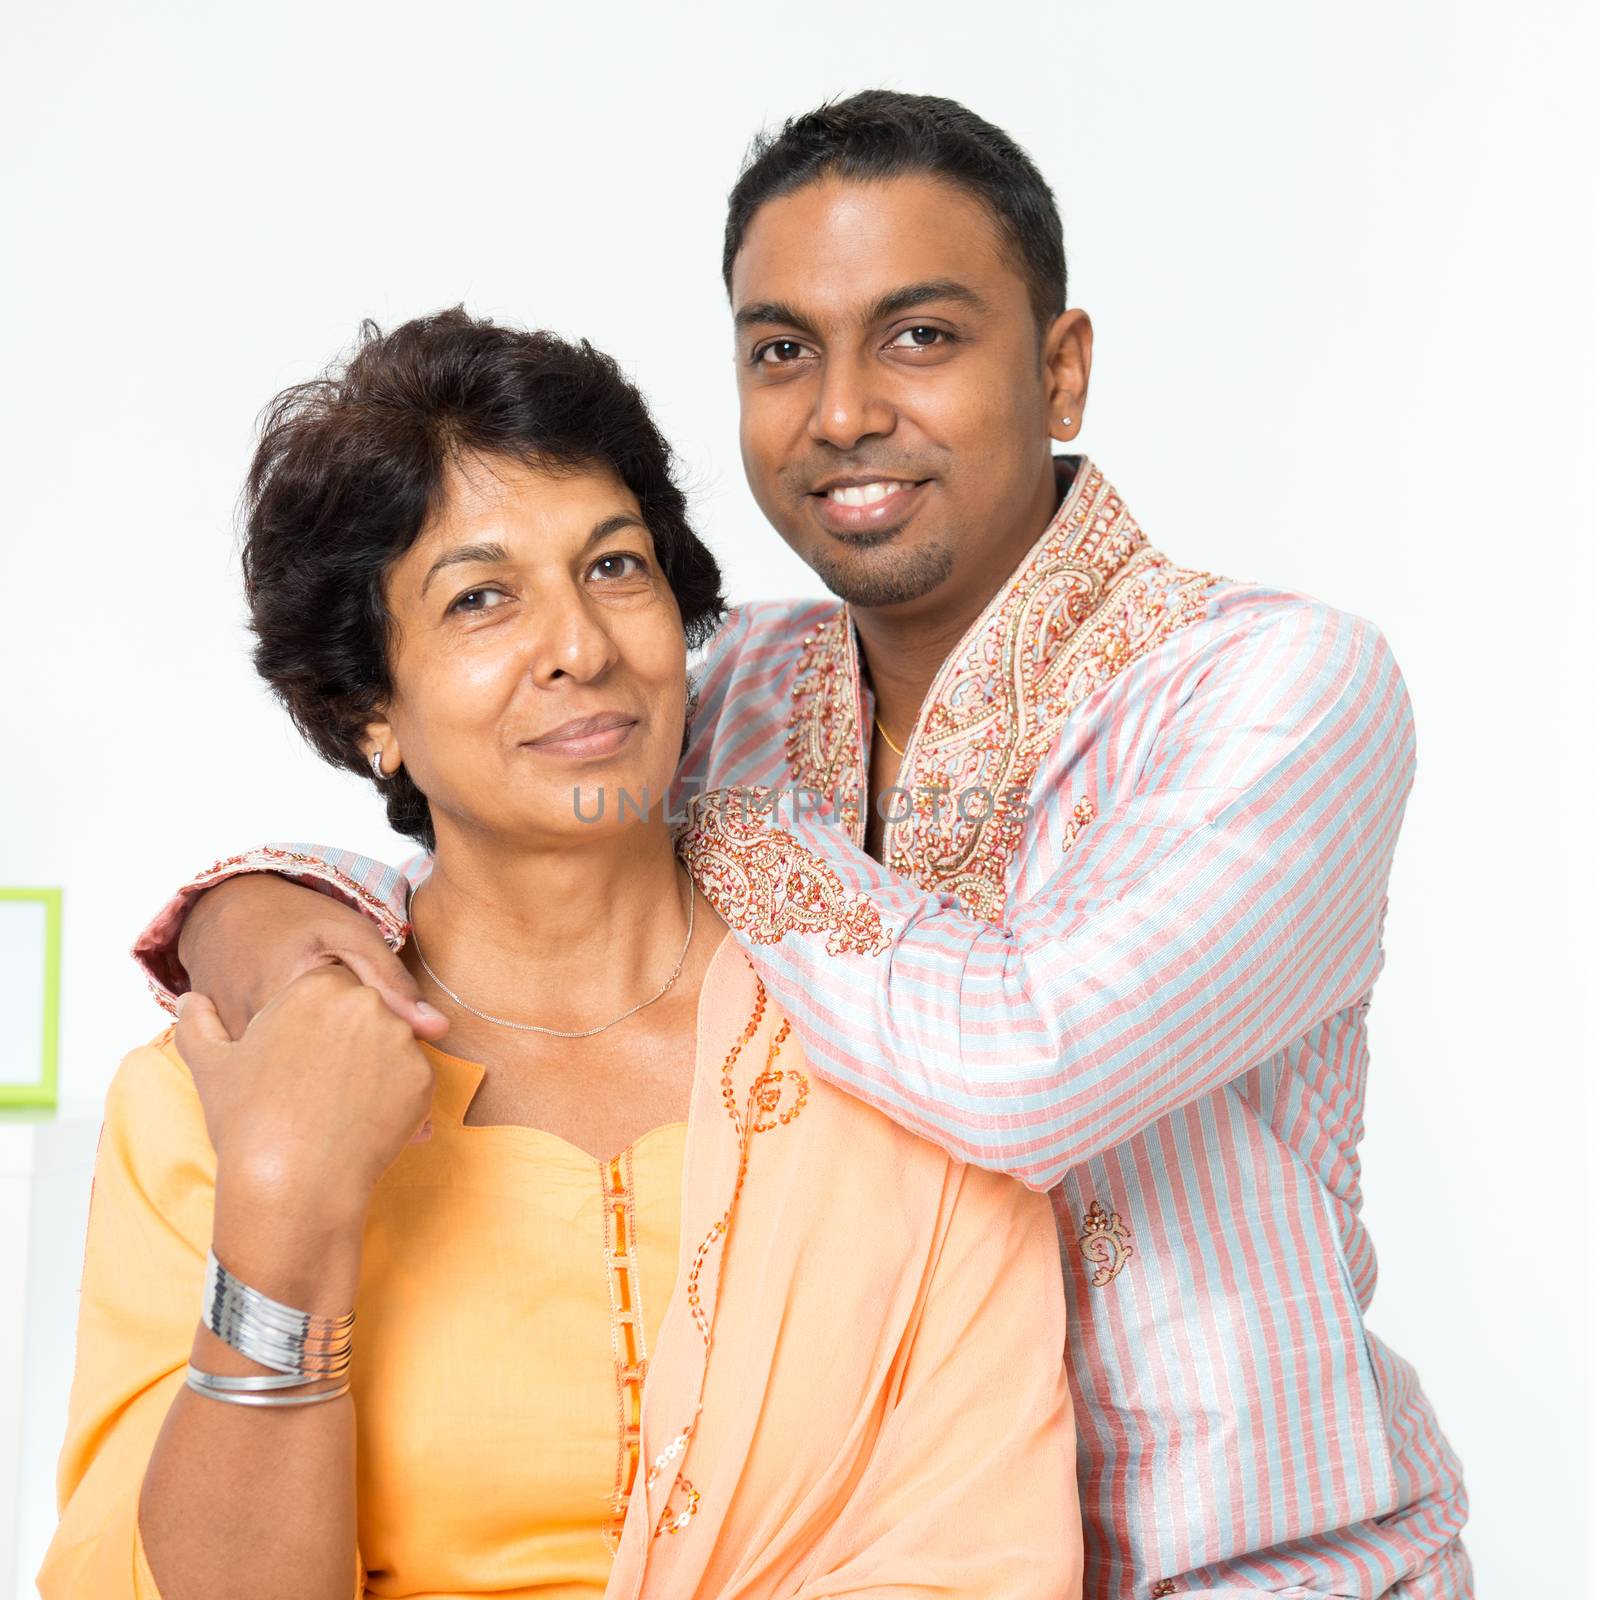 Portrait of beautiful Indian family at home. Mature 50s Indian mother and her 30s grown son.